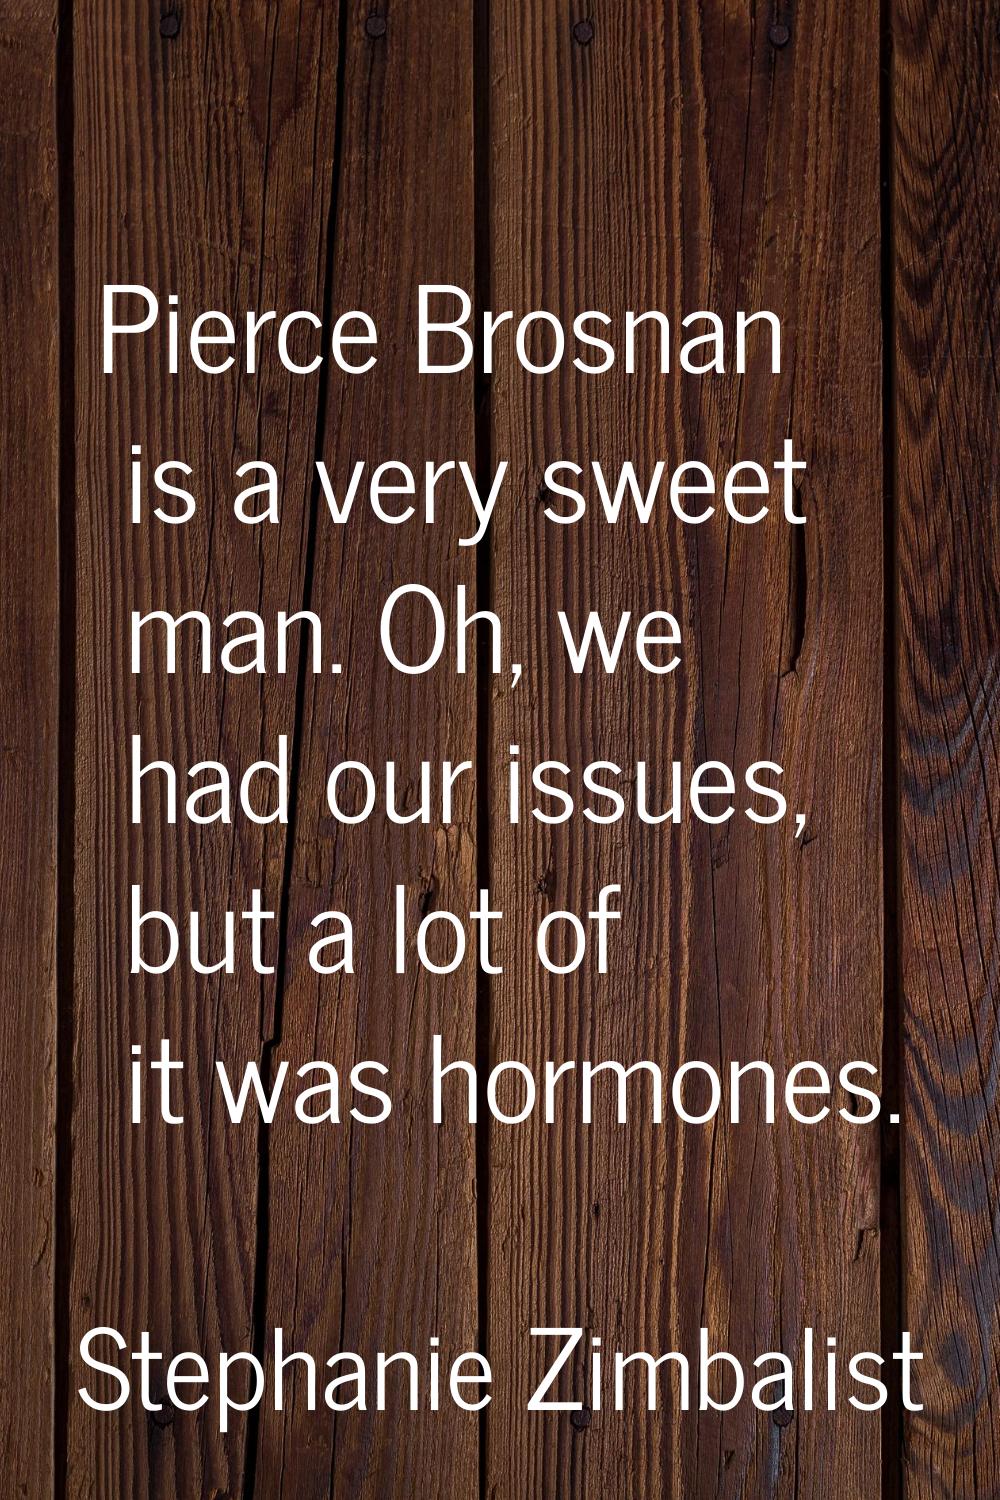 Pierce Brosnan is a very sweet man. Oh, we had our issues, but a lot of it was hormones.